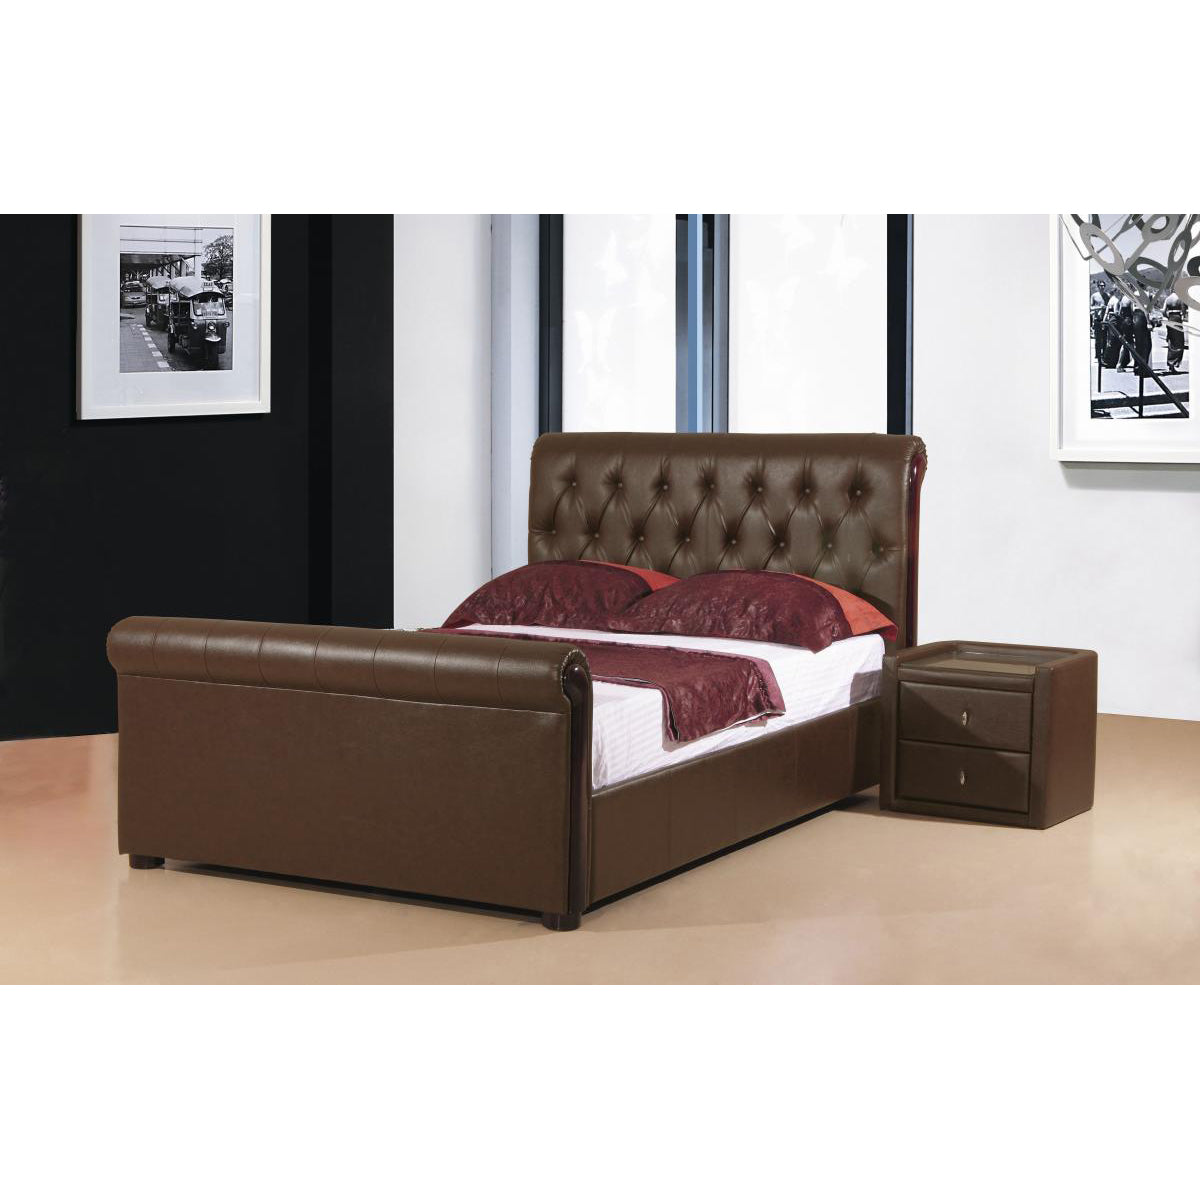 Caxton Storage PU Double Bed Brown